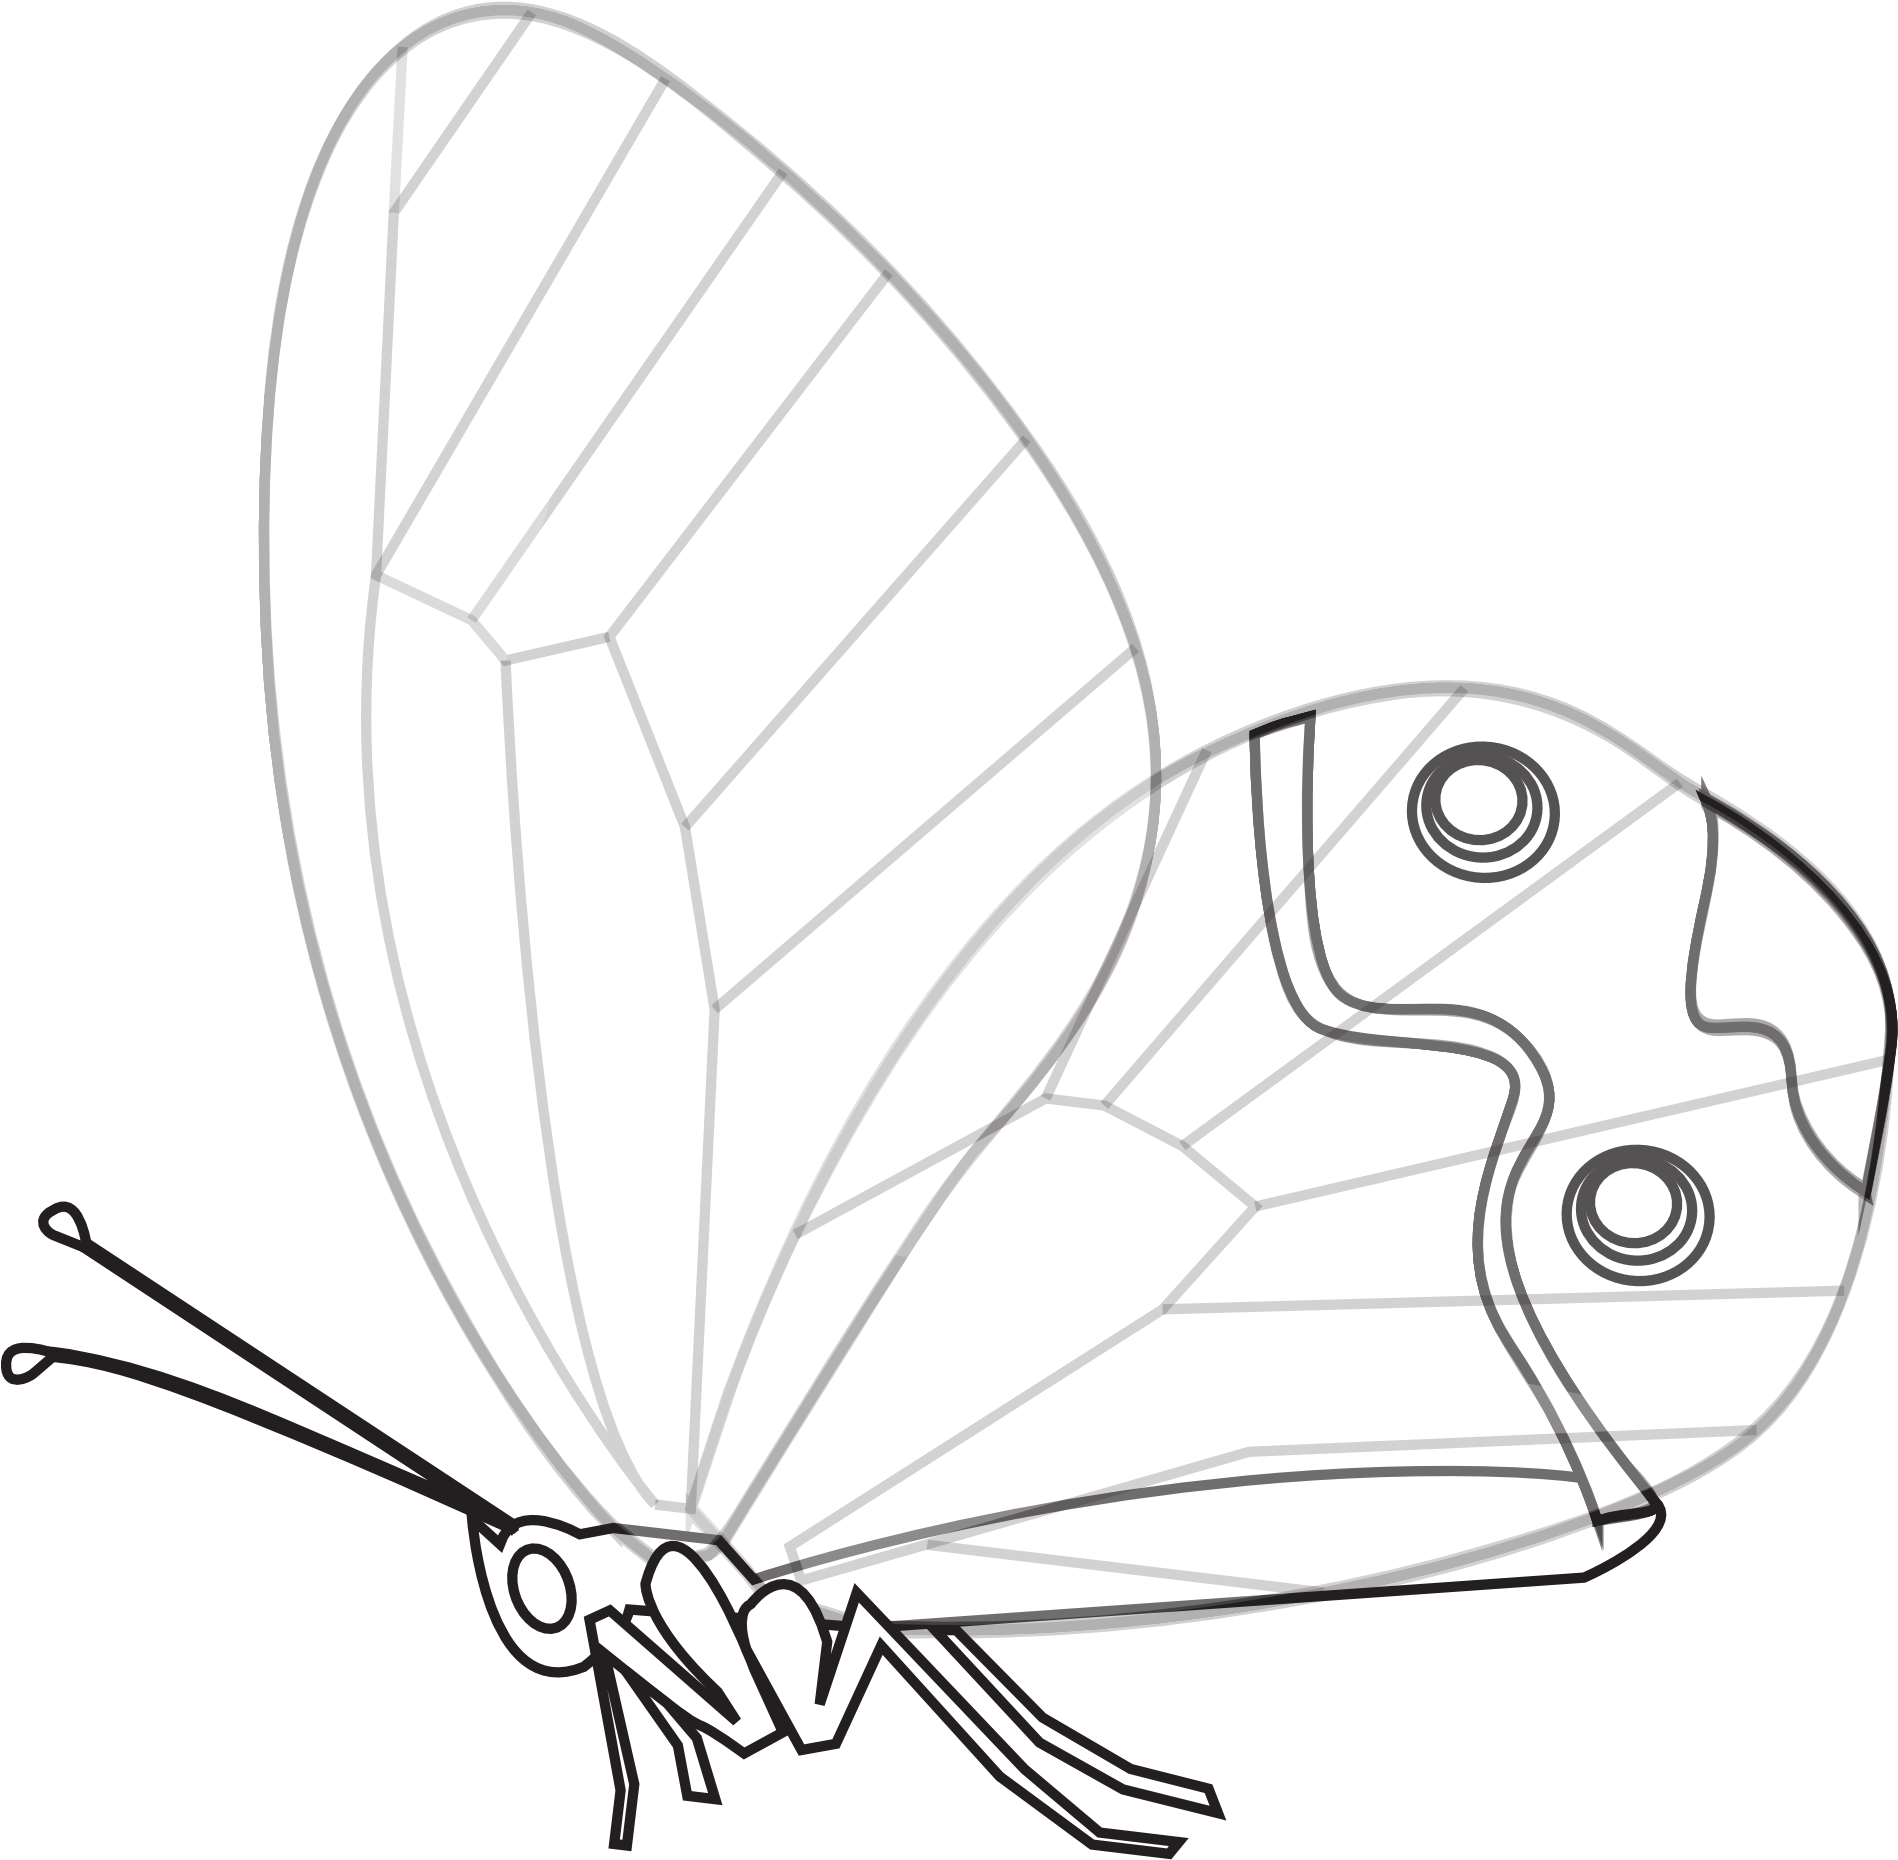 Monochrome Butterfly Illustration PNG